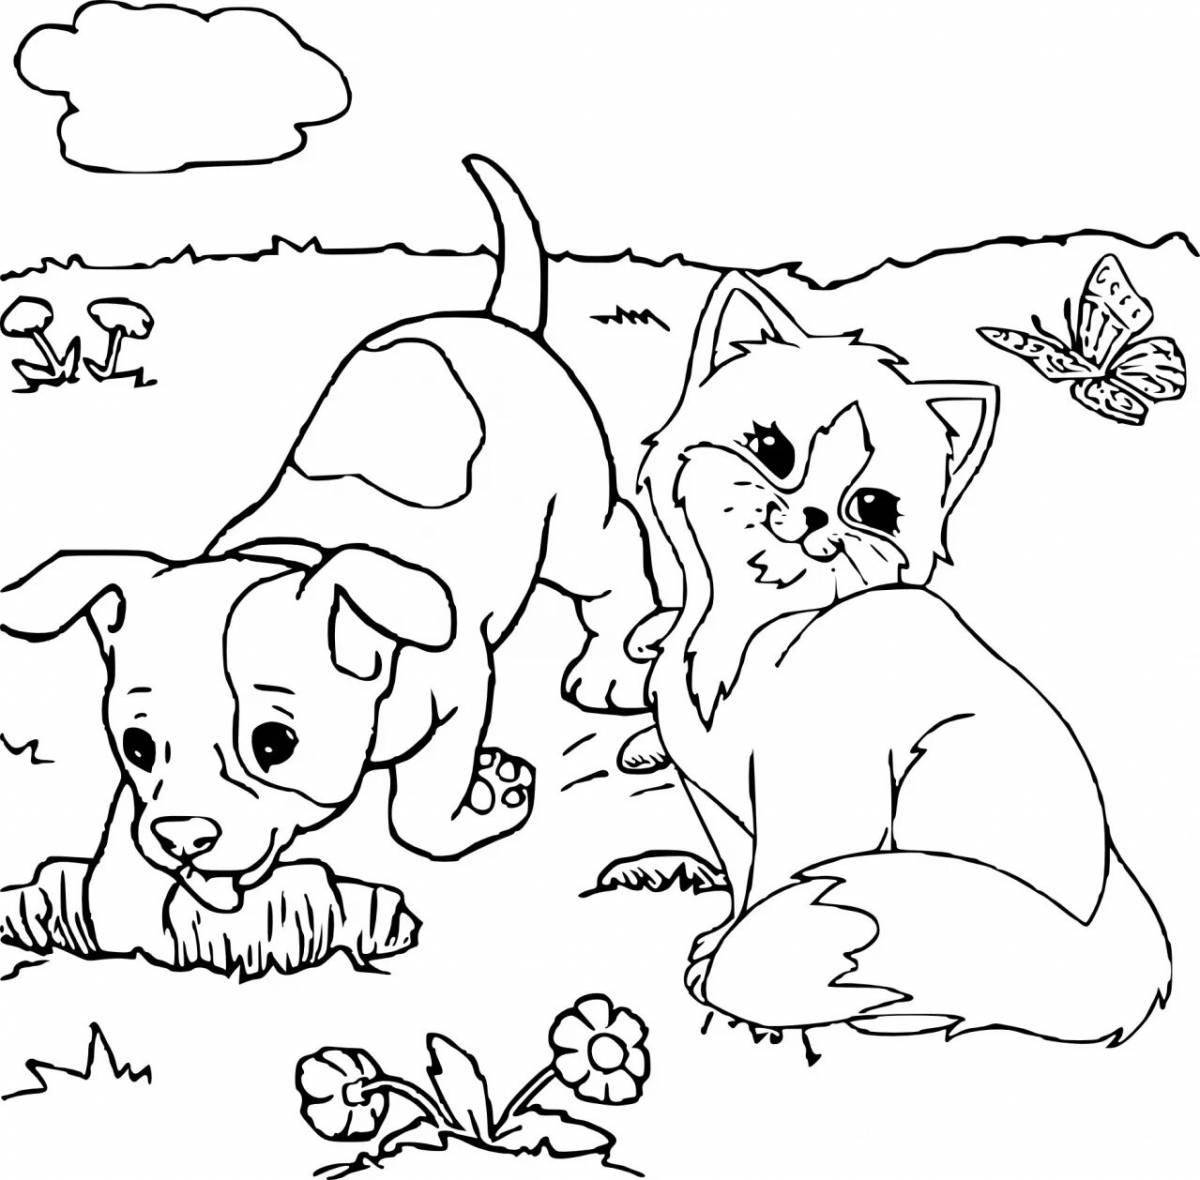 Sparkling coloring book for girls, cats and dogs